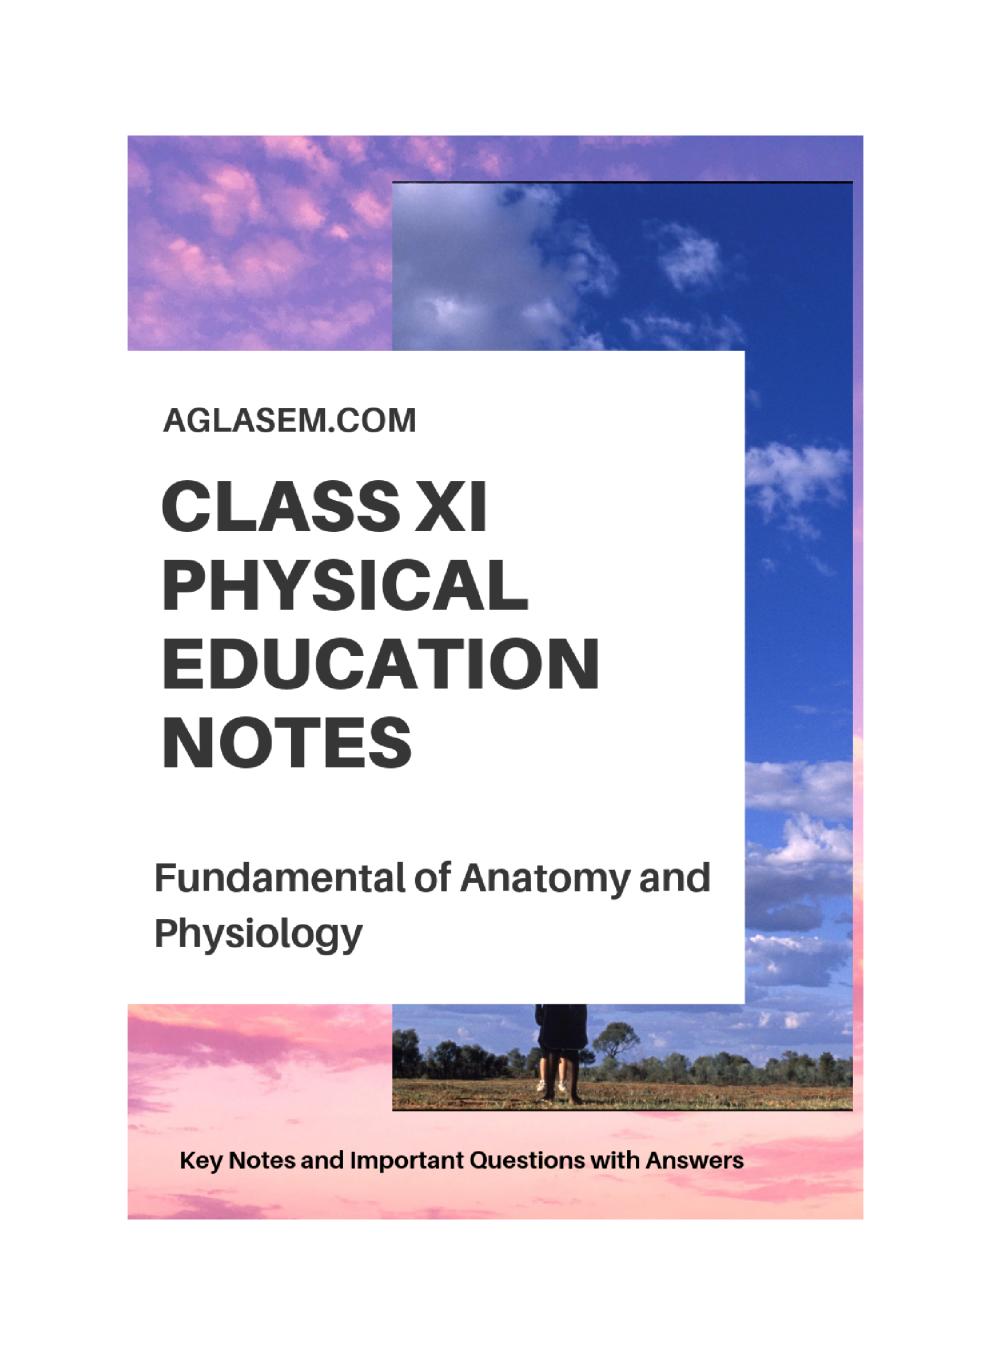 Class 11 Physical Education Notes for Fundamentals of Anatomy and Physiology - Page 1